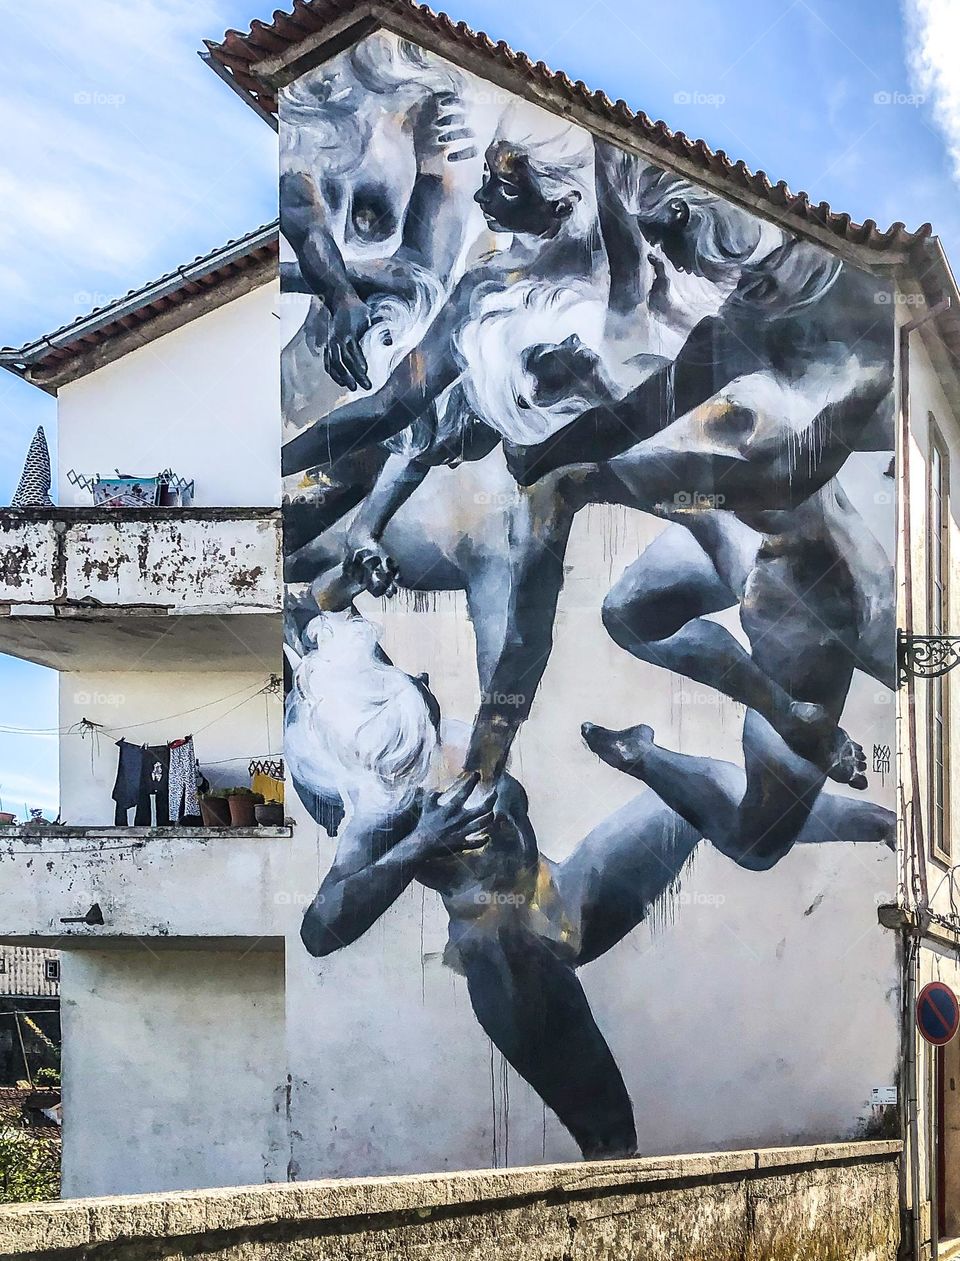 Snapping (2017) by Bosoletti on the wall of a residential building in Covilha as part of the Wool Urban Art Festival in Portugal 